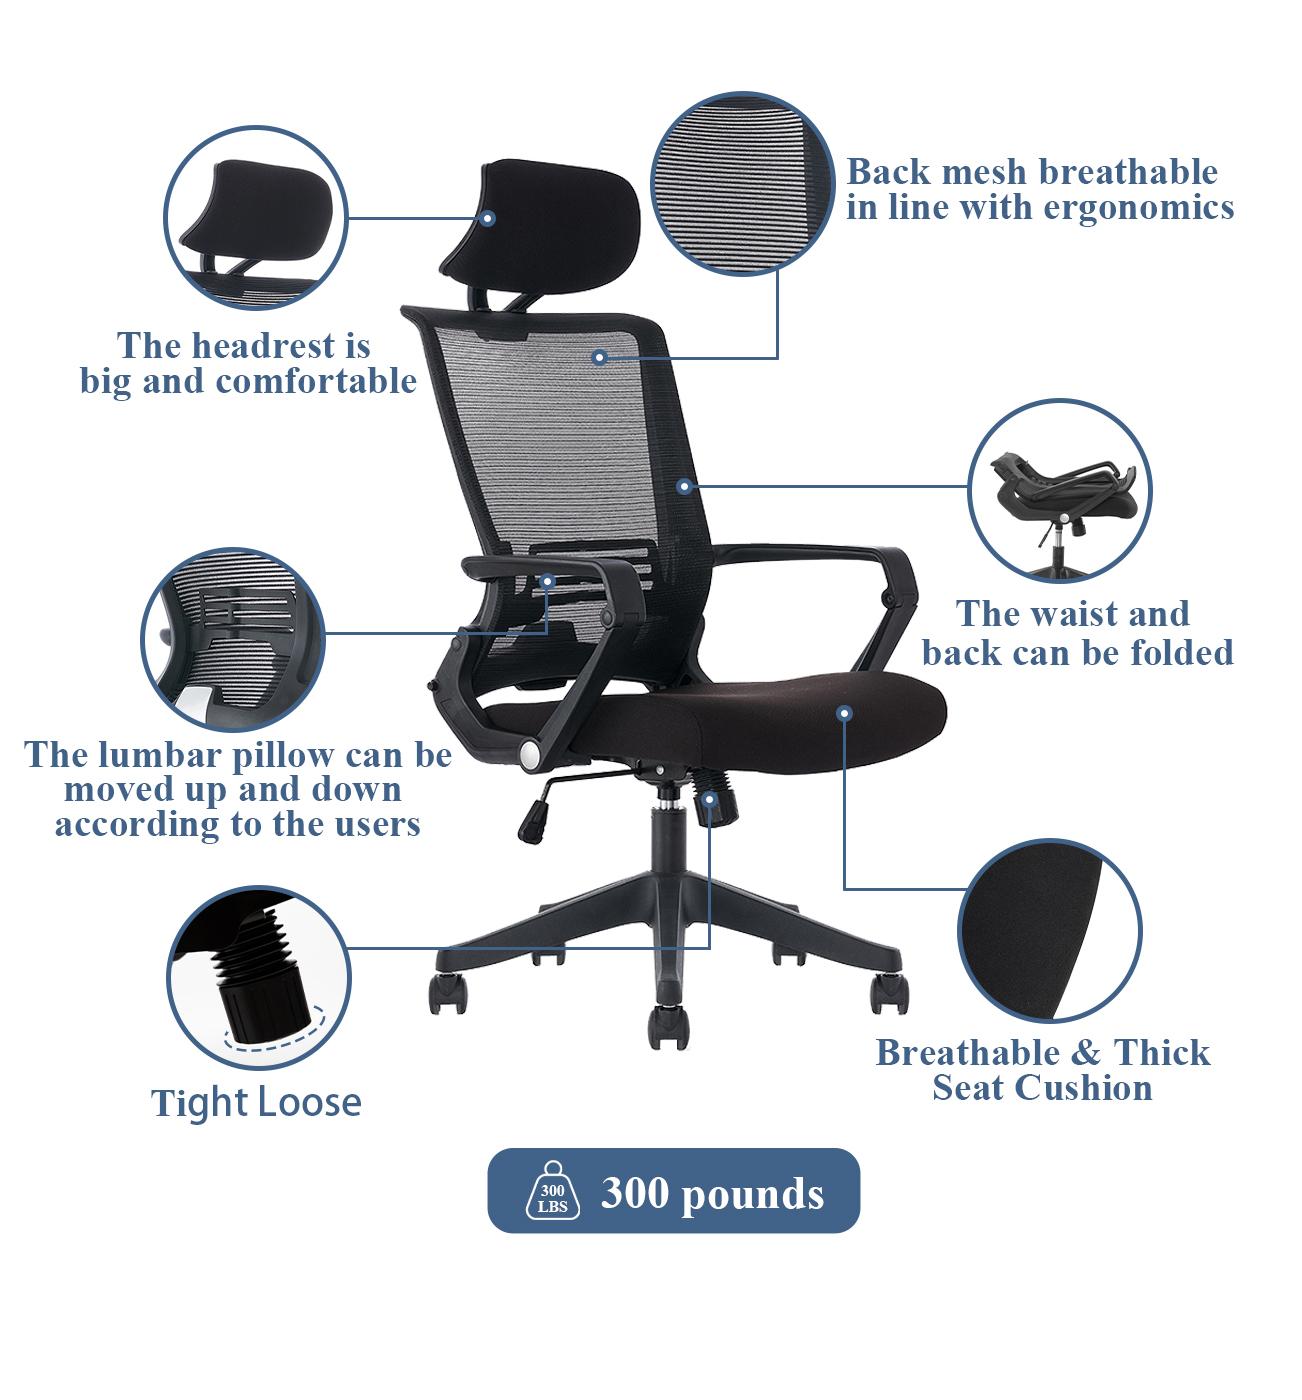 High Back Office Chair with Fixed Arms and Headrest, Black